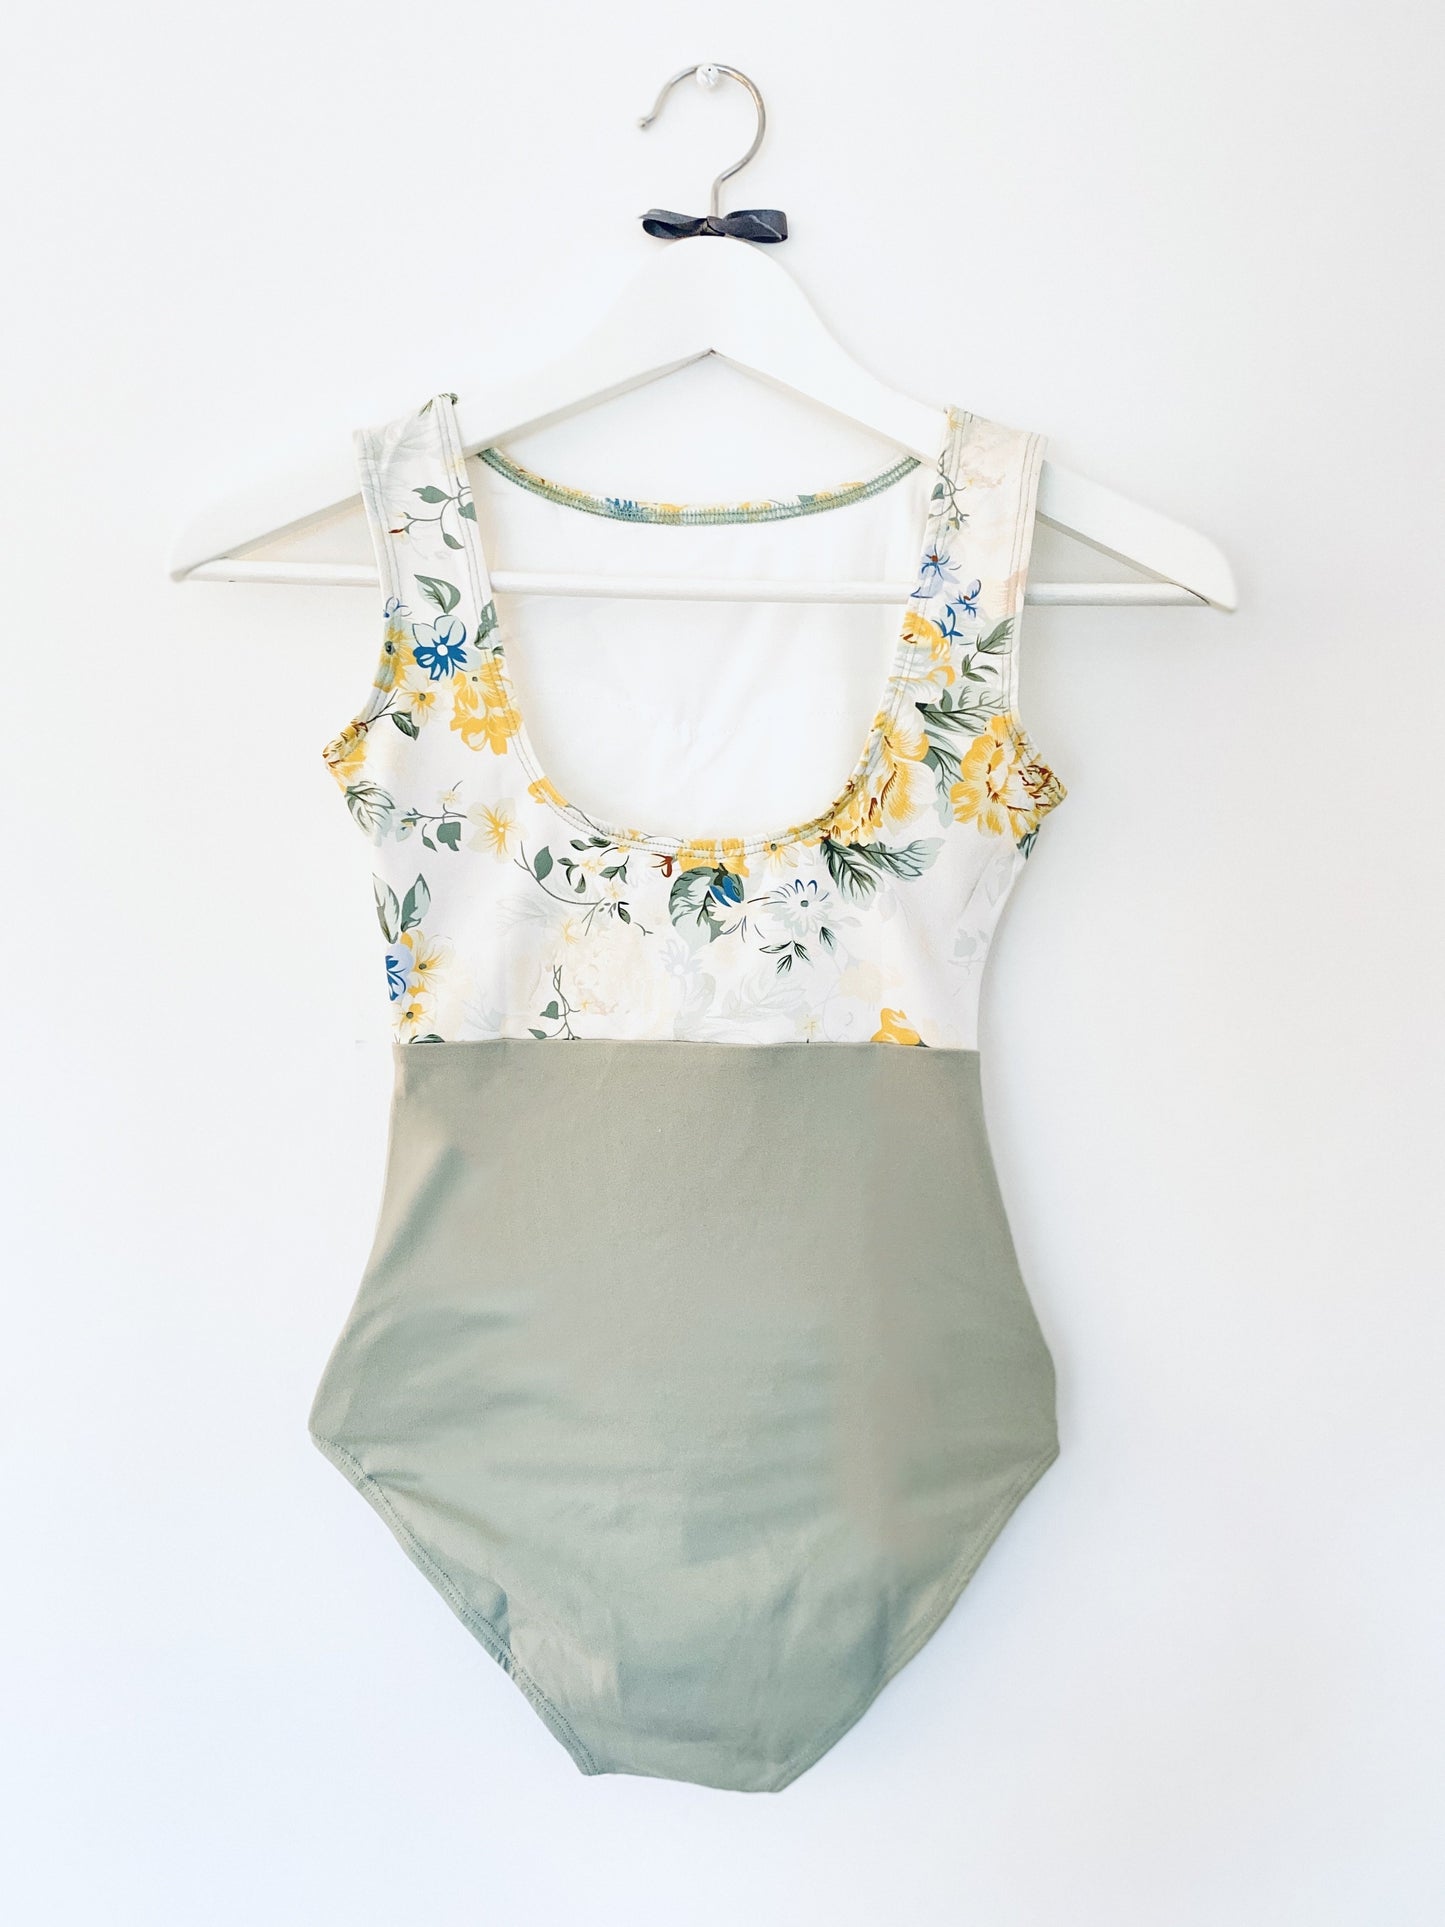 leotard in floral print sage and yellow . Sleeveless tank leotard from The Collective Dancewear Petite